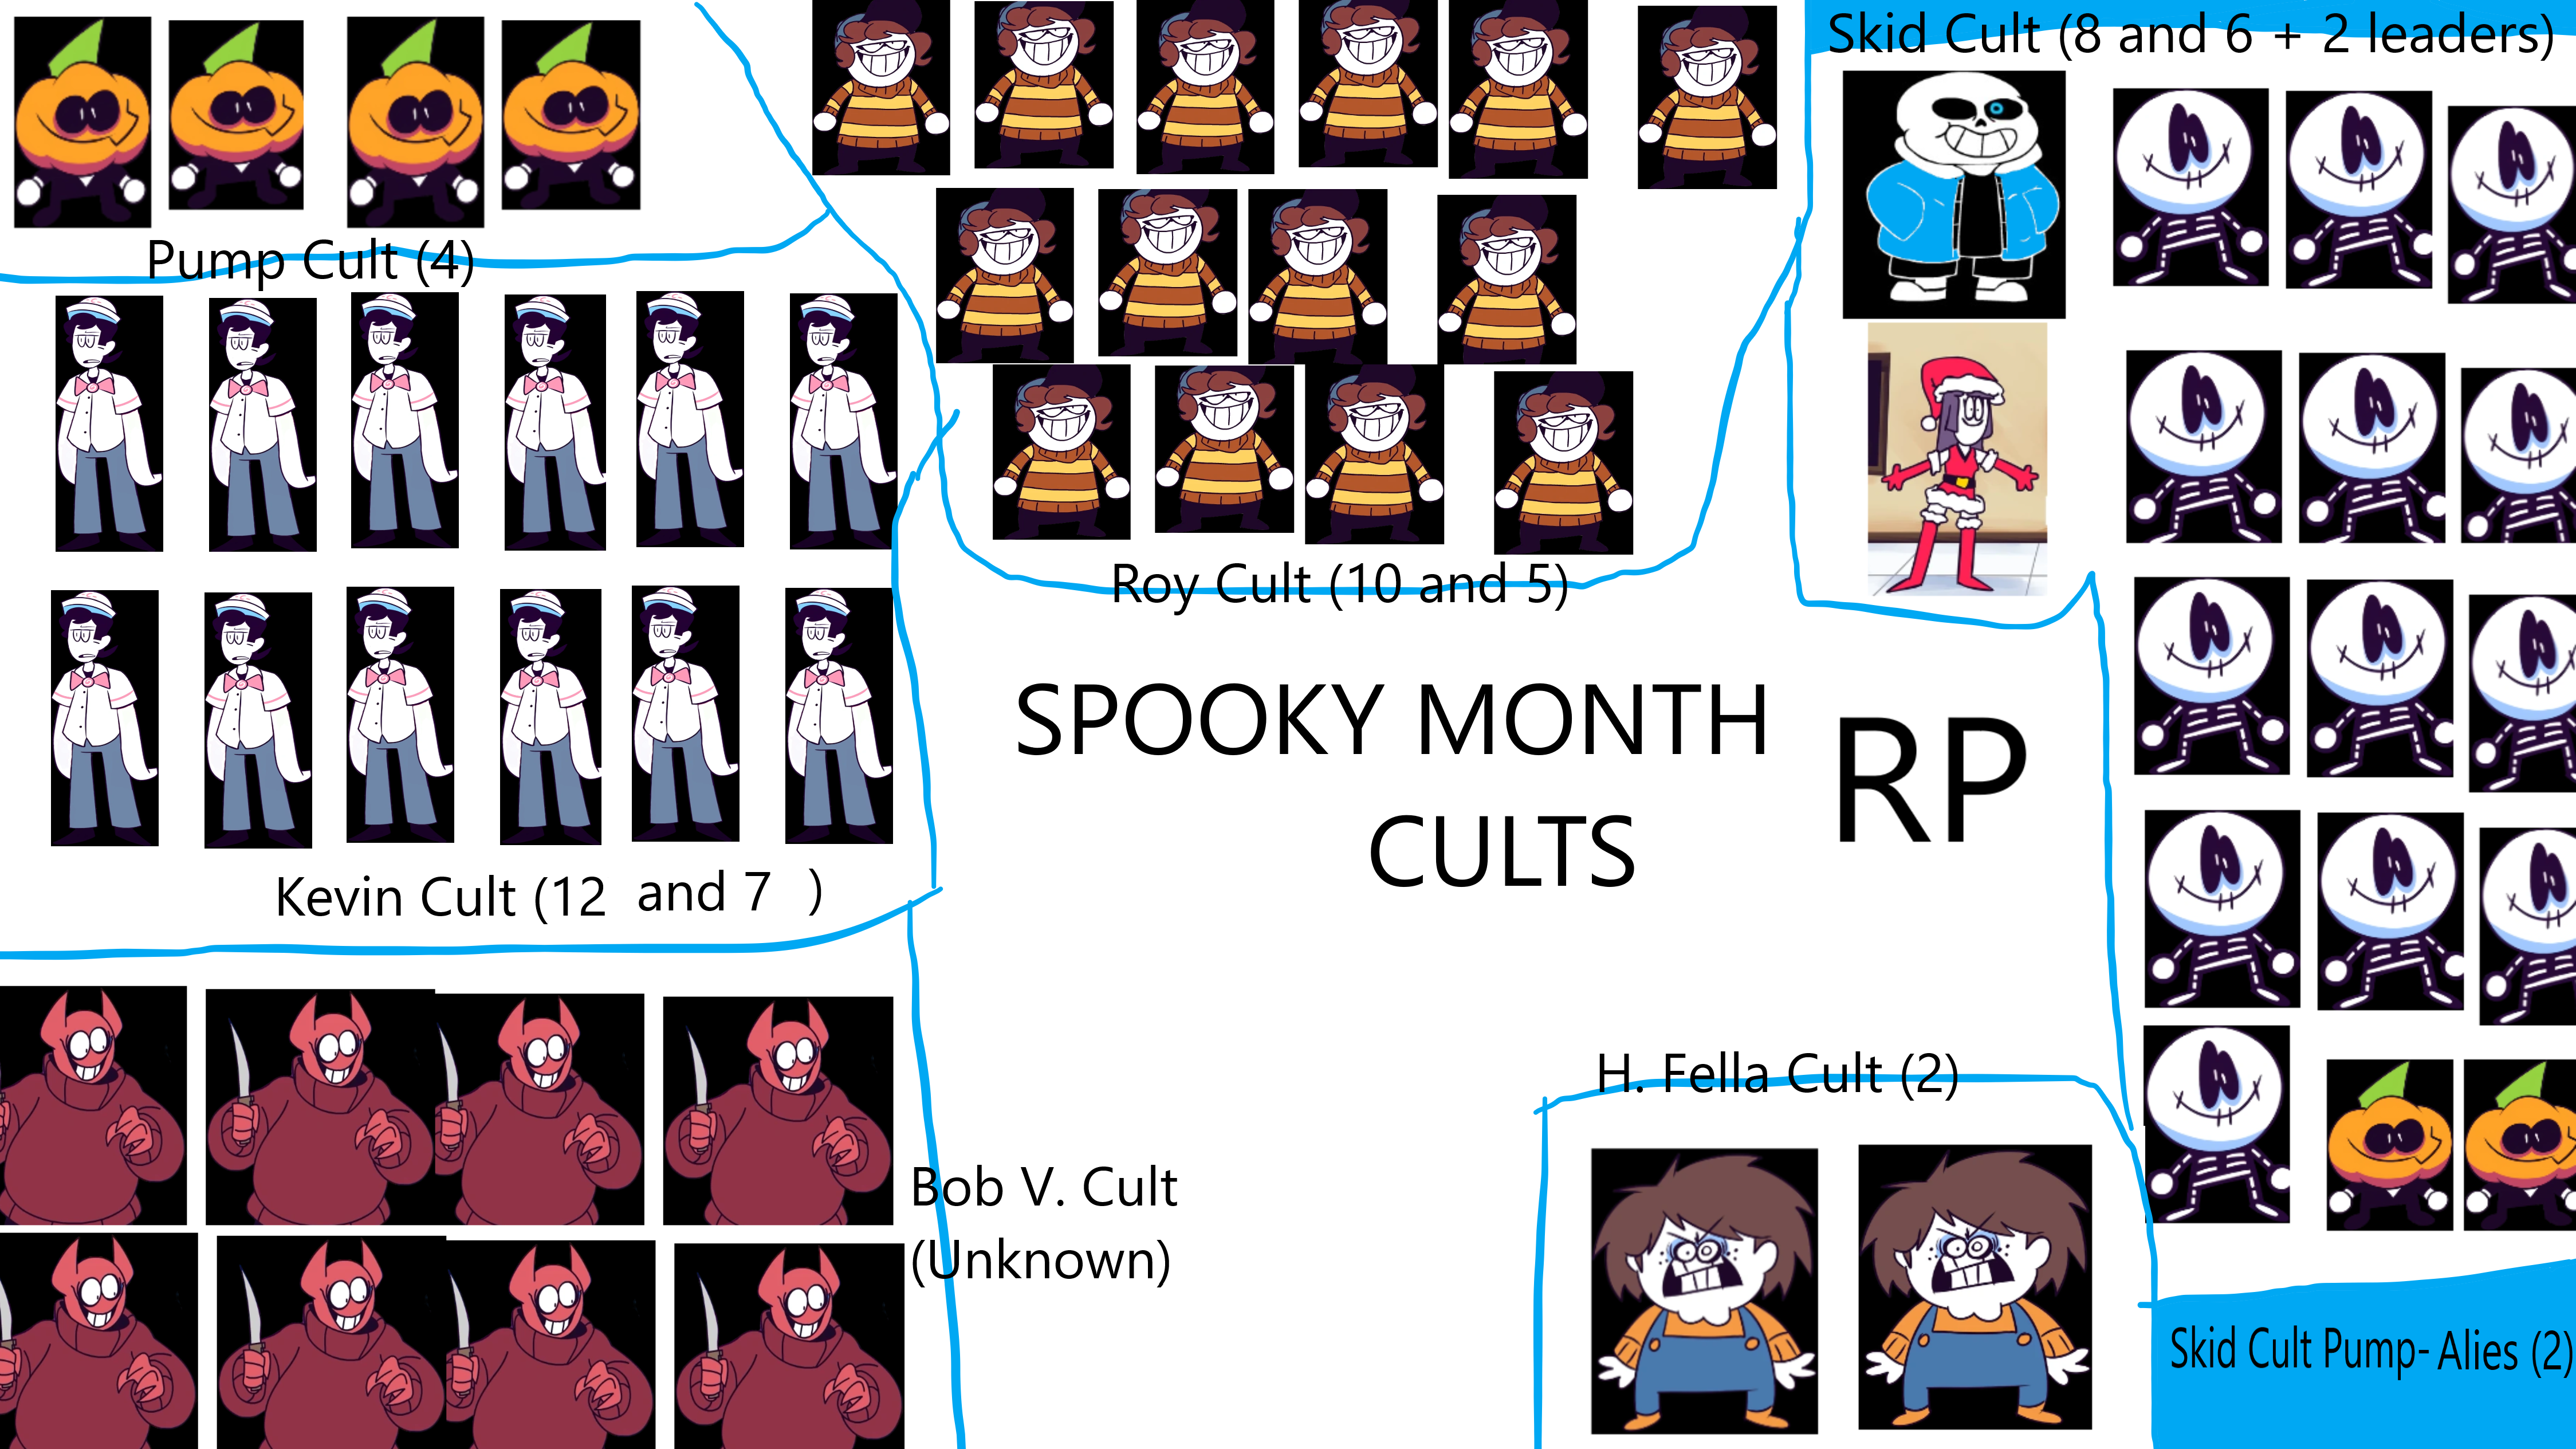 SPOOKY MONTH - the official spooky month cult - Quora